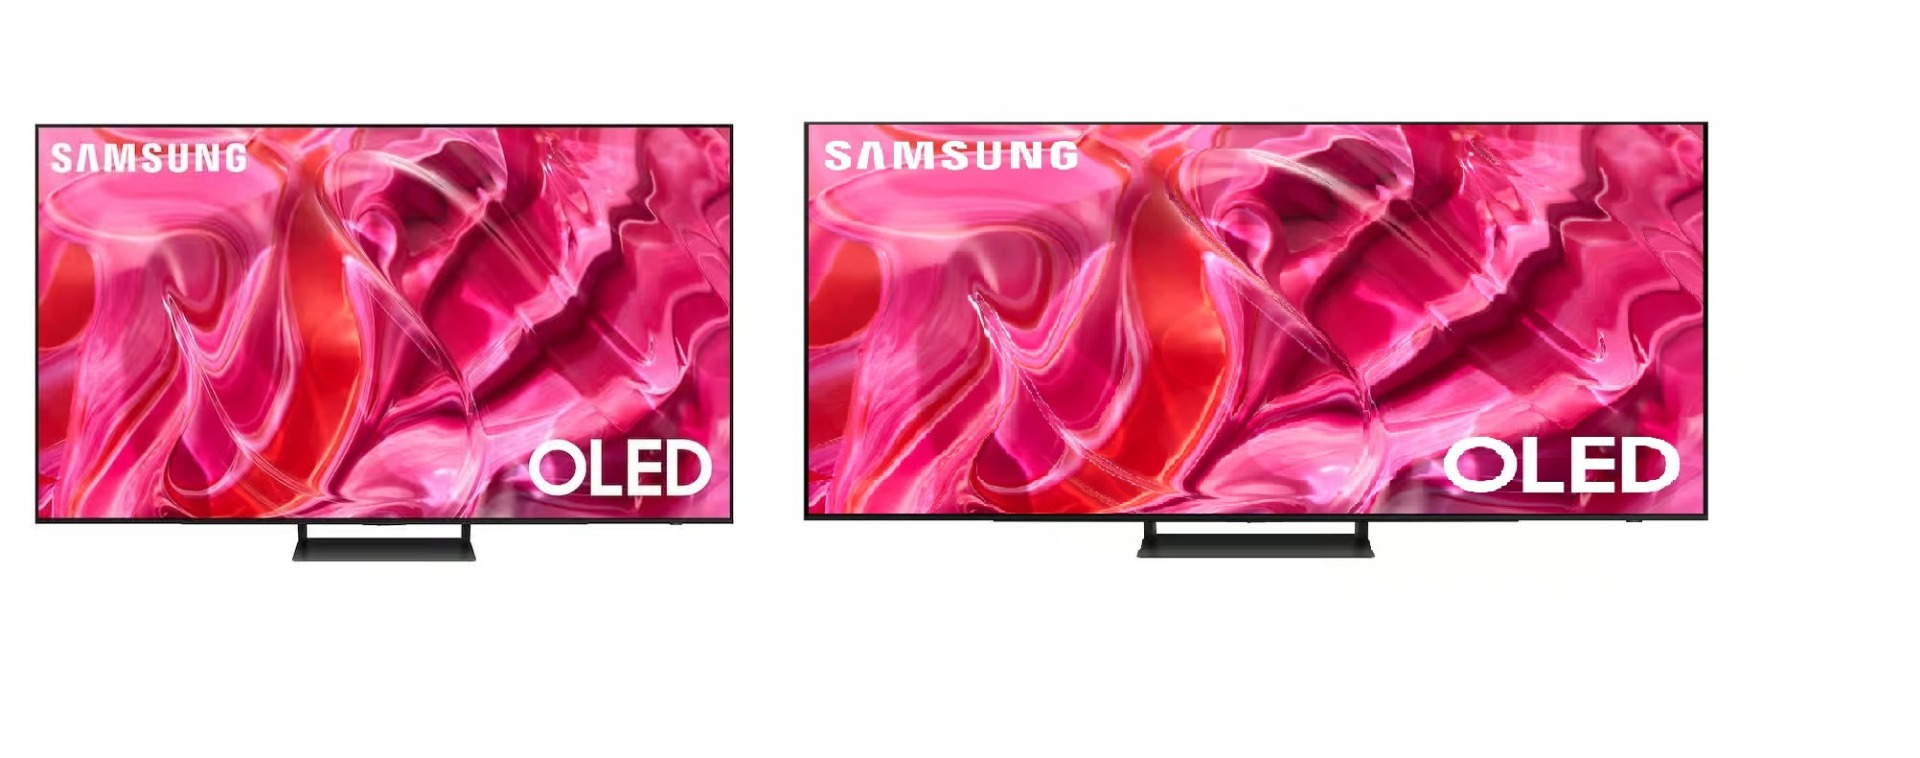 Samsung Series 9 77 Inch 4K Smart OLED TV with Built-in Receiver - QN77S90CAF with Samsung 55 Inch 4K UHD OLED Smart TV with Built-In Receiver- 55S90CA